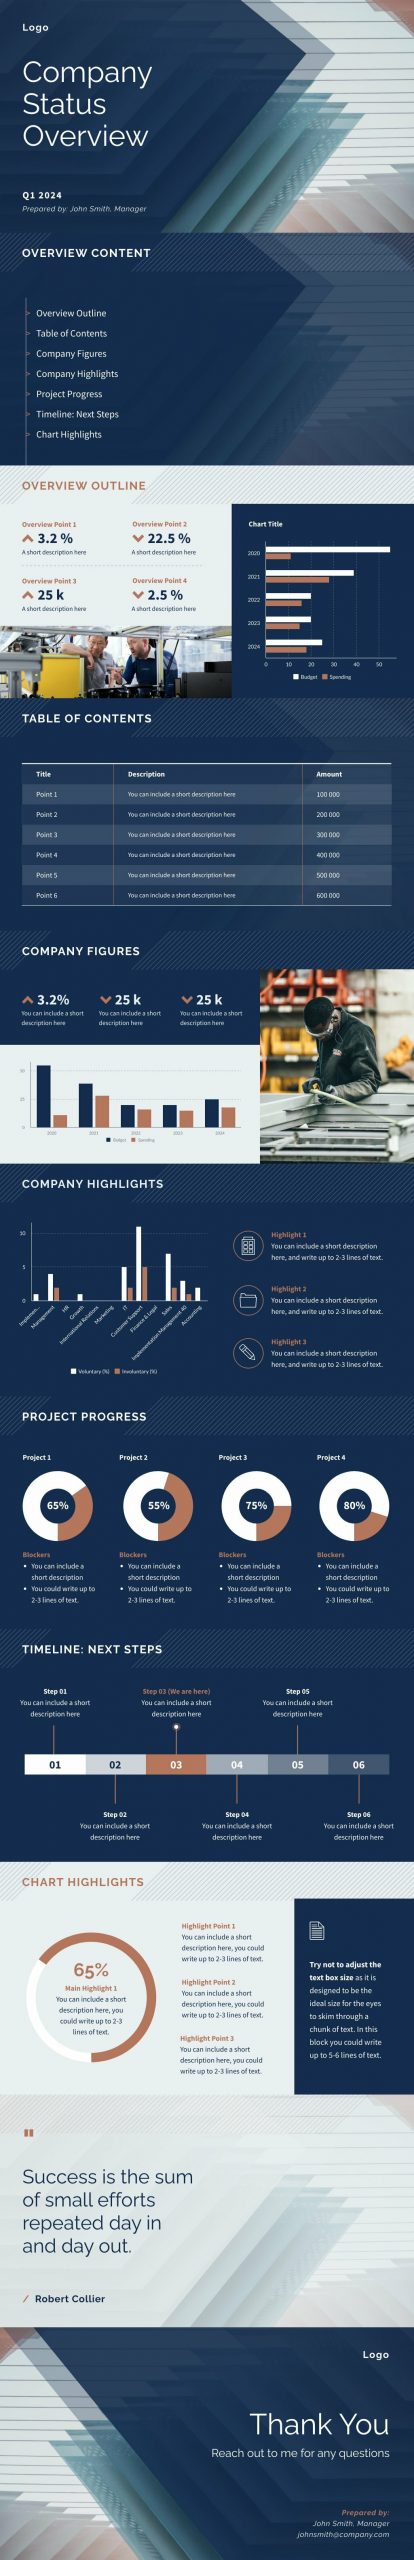 Company Status Overview Widescreen Presentation Template